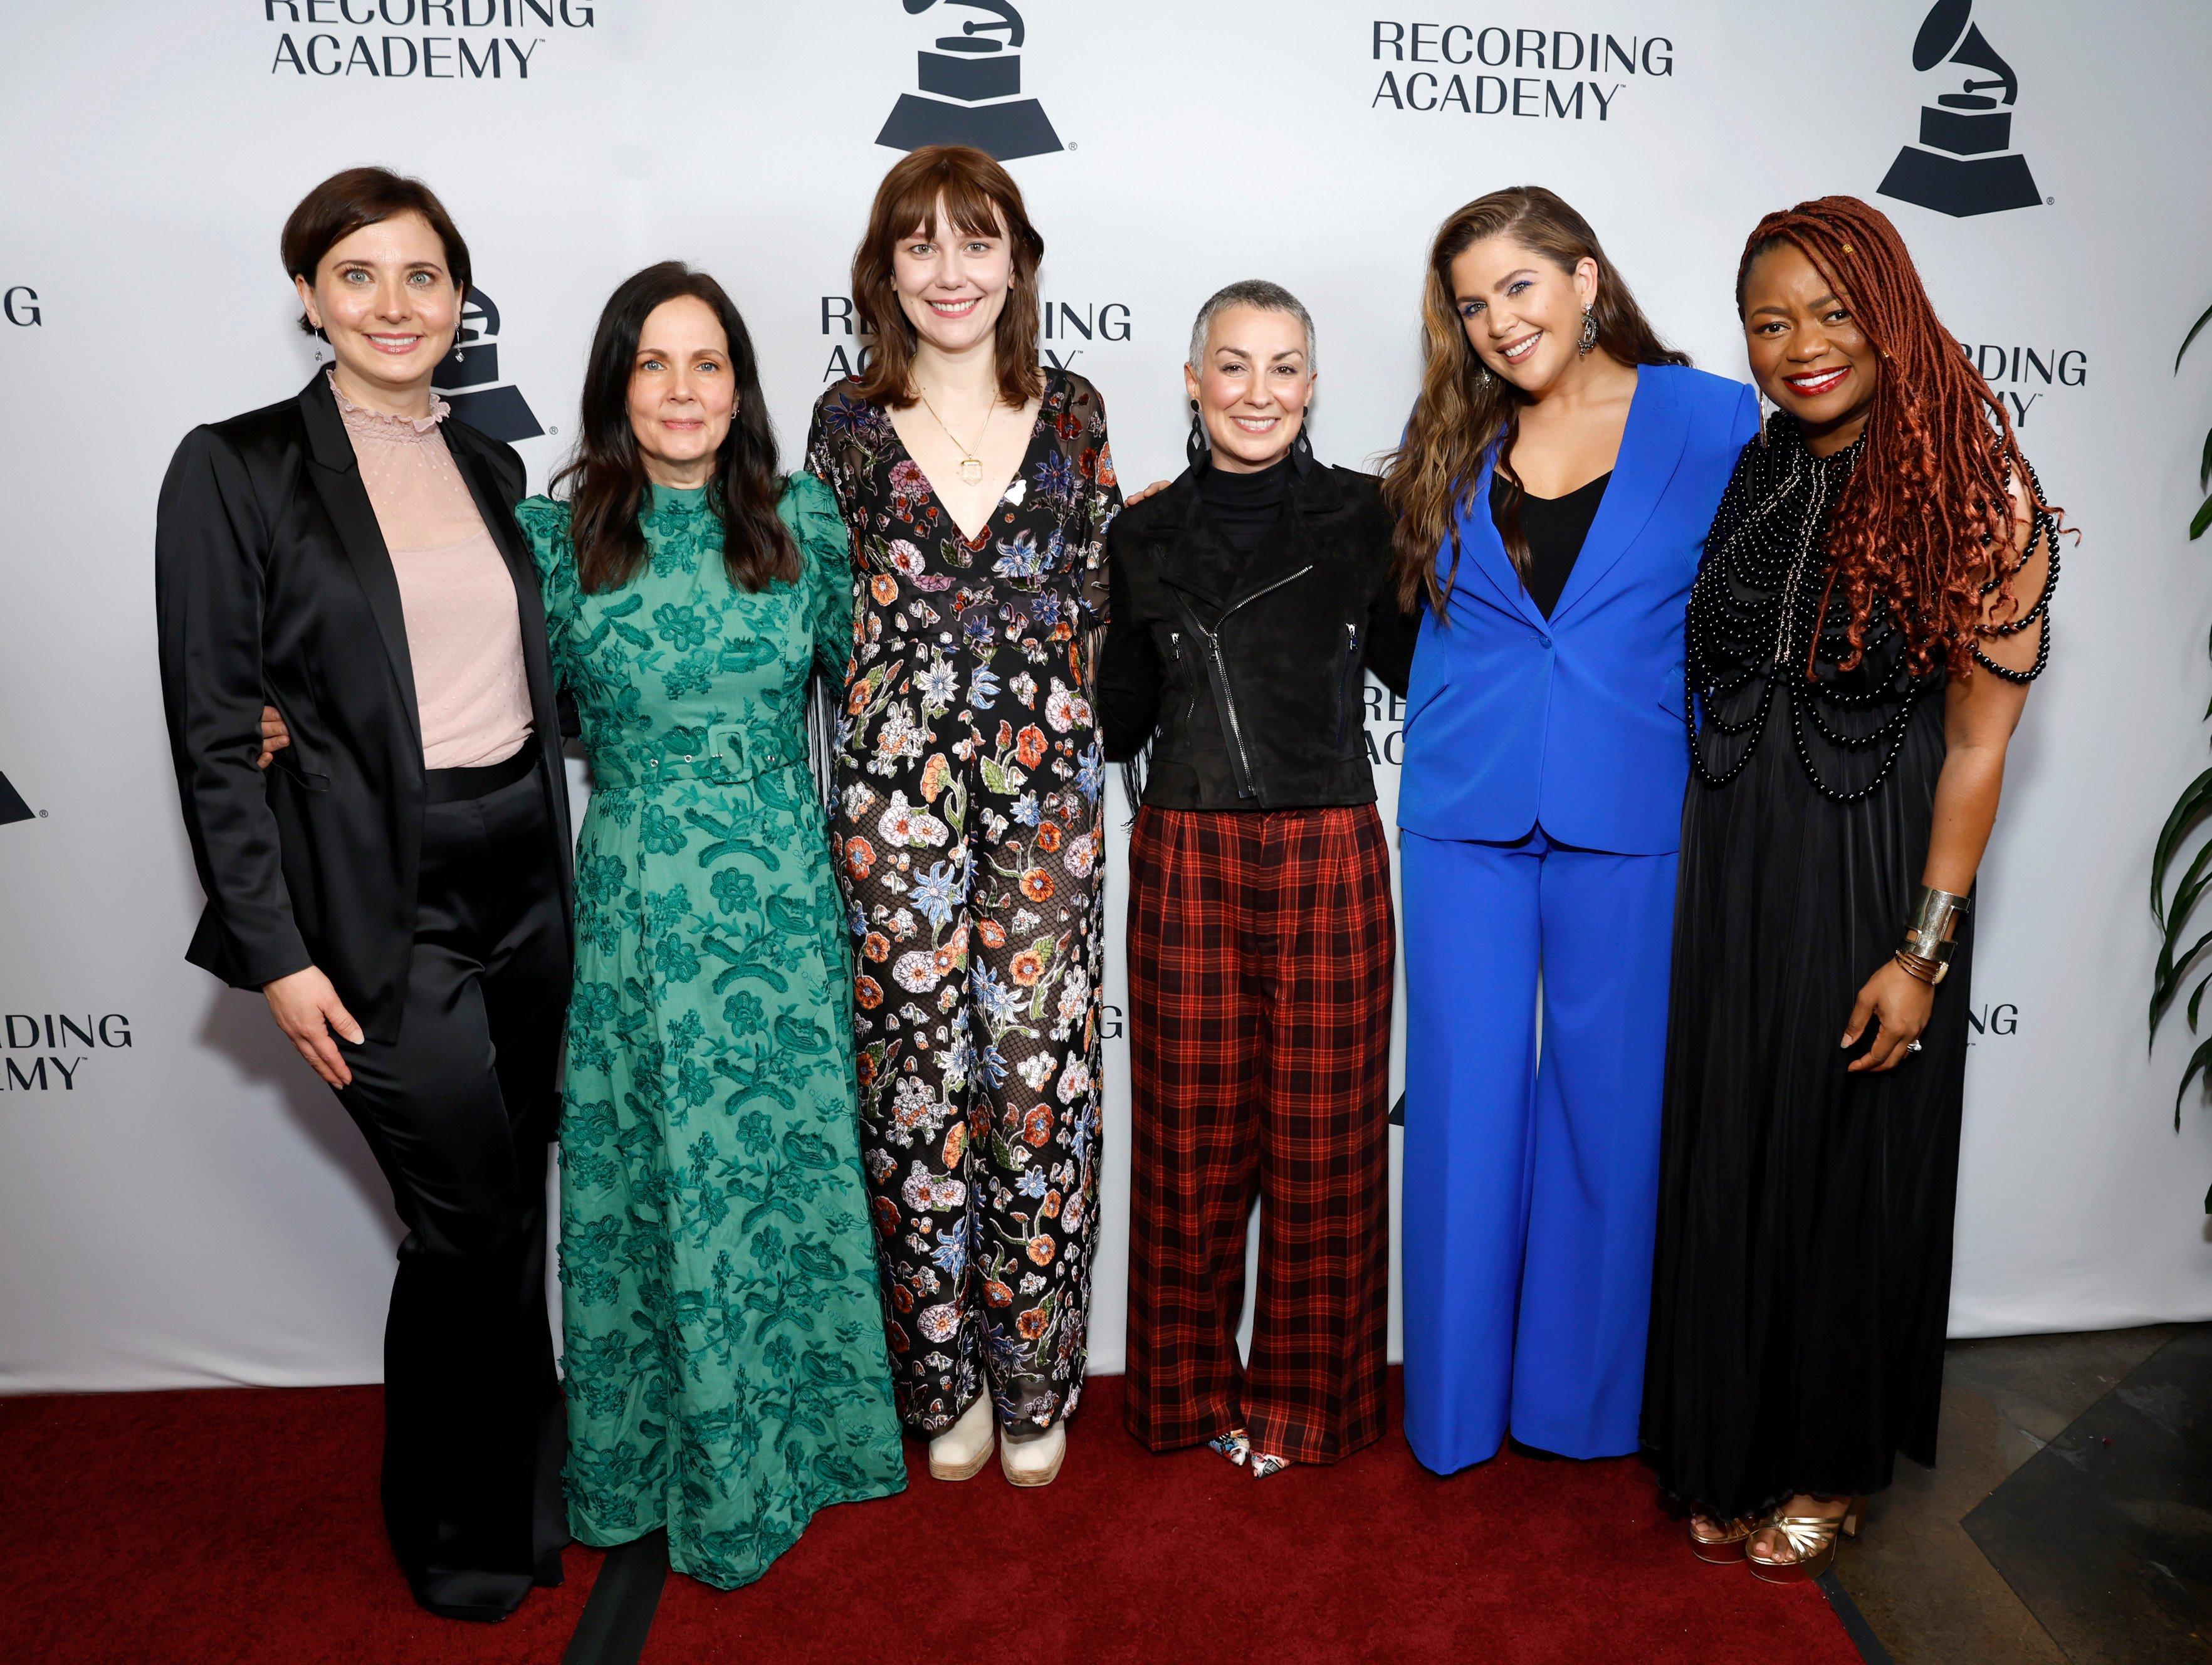 A Look Inside The 2023 Recording Academy Nashville Chapter Nominee Celebration, A Tribute To Its Supportive Musical Community GRAMMY photo